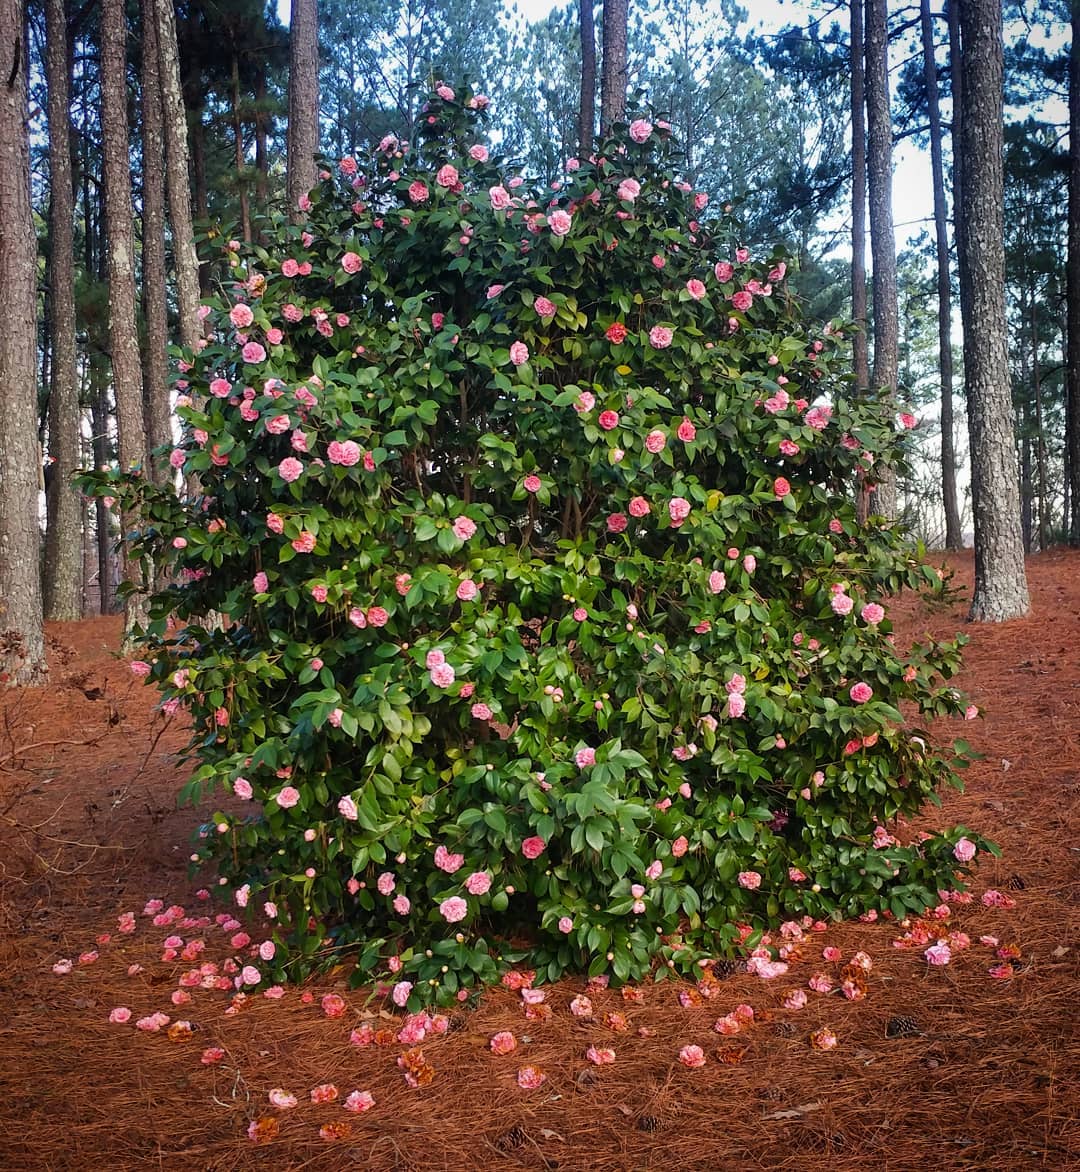 This Camellia is just delightful! It's like a giant flower arrangement in the middle of the woods. Thank you person who lived here before me for having a vision.